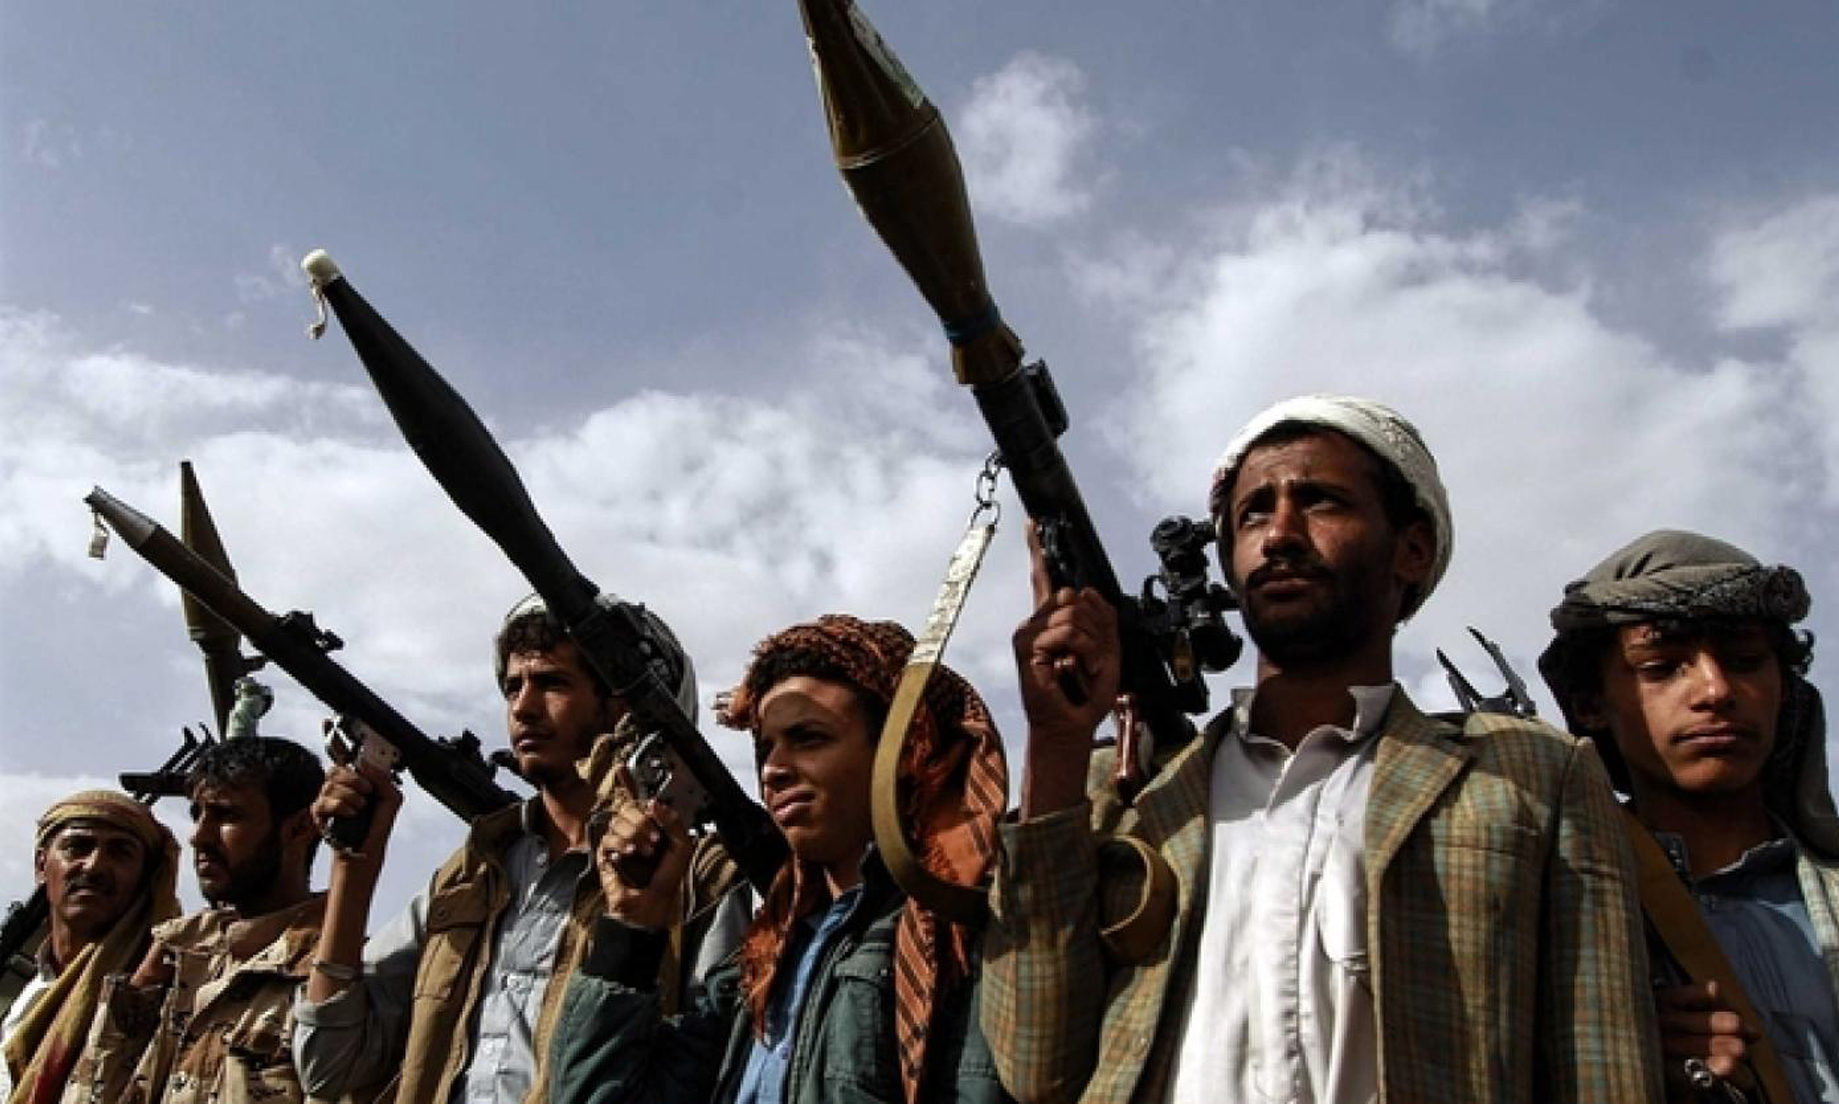 Yemen’s Houthi rebels agree to withdraw from Hodeidah after UN mediation